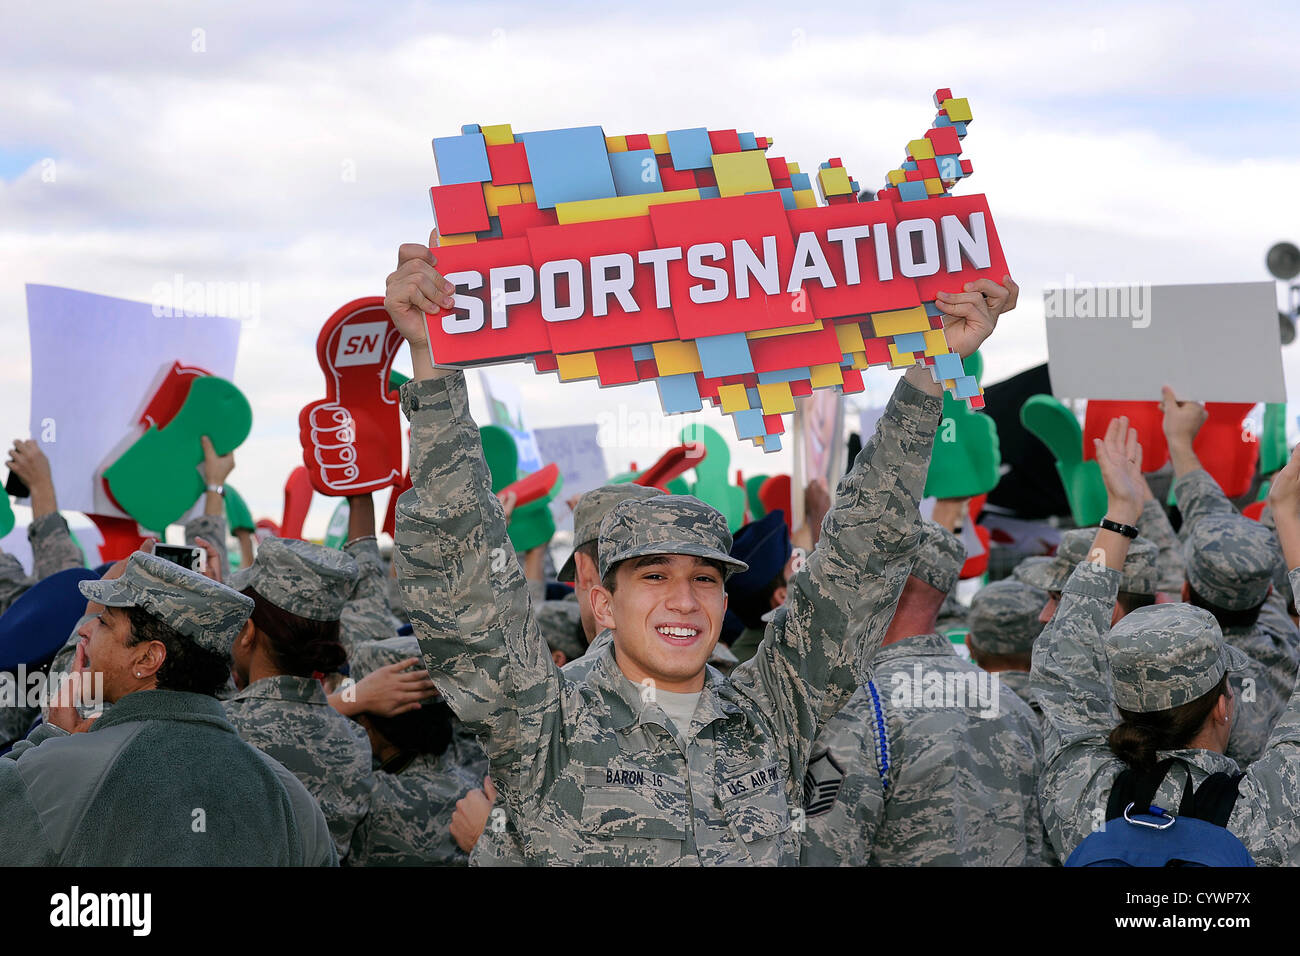 Cadet 4th Class Henry Baron of Cadet Squadron 12 hoists a SportsNation logo during EPSN's SportsNation live broadcast from the U.S. Air Force Academy's terrazzo Nov. 8, 2012 in Colorado Springs, Colo. The live broadcast was a salute to veterans Stock Photo